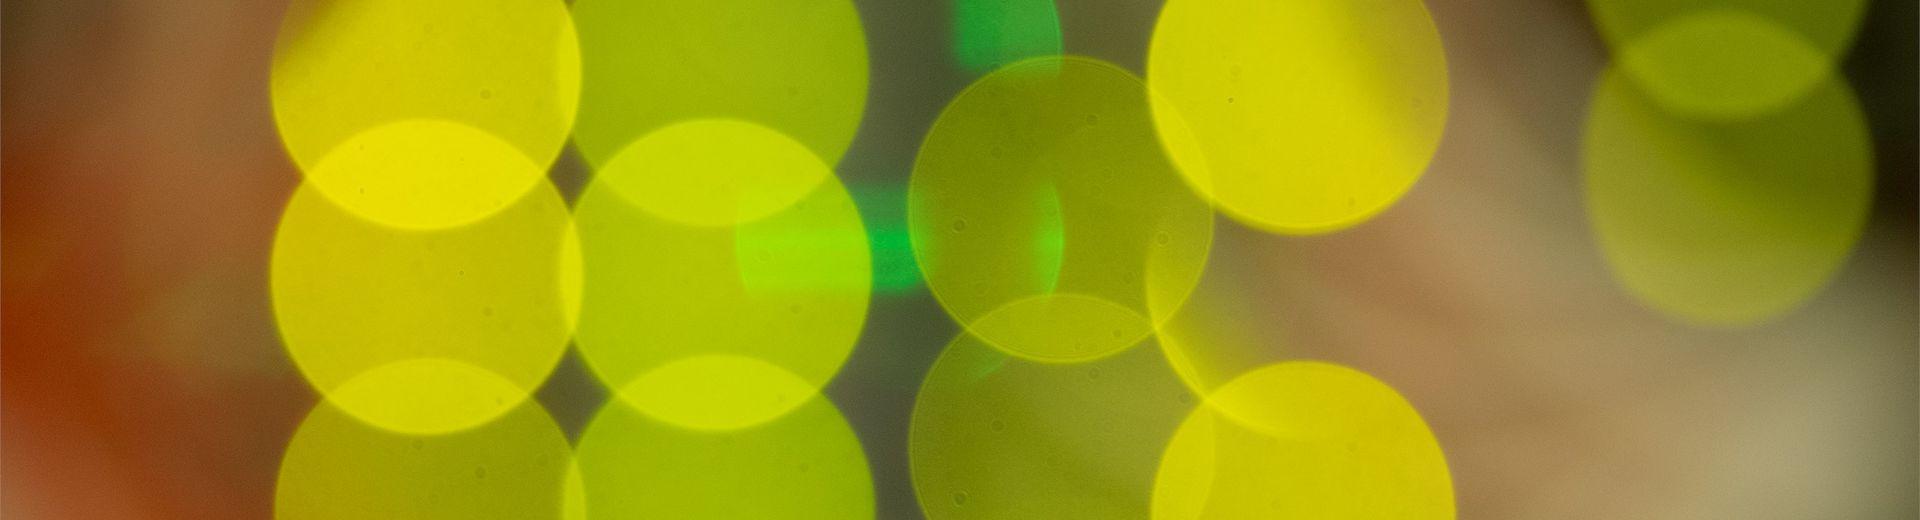 Image is a super close up shot of lights in 的 back of computer servers resulting in an image of overlapping bright yellow discs of color.